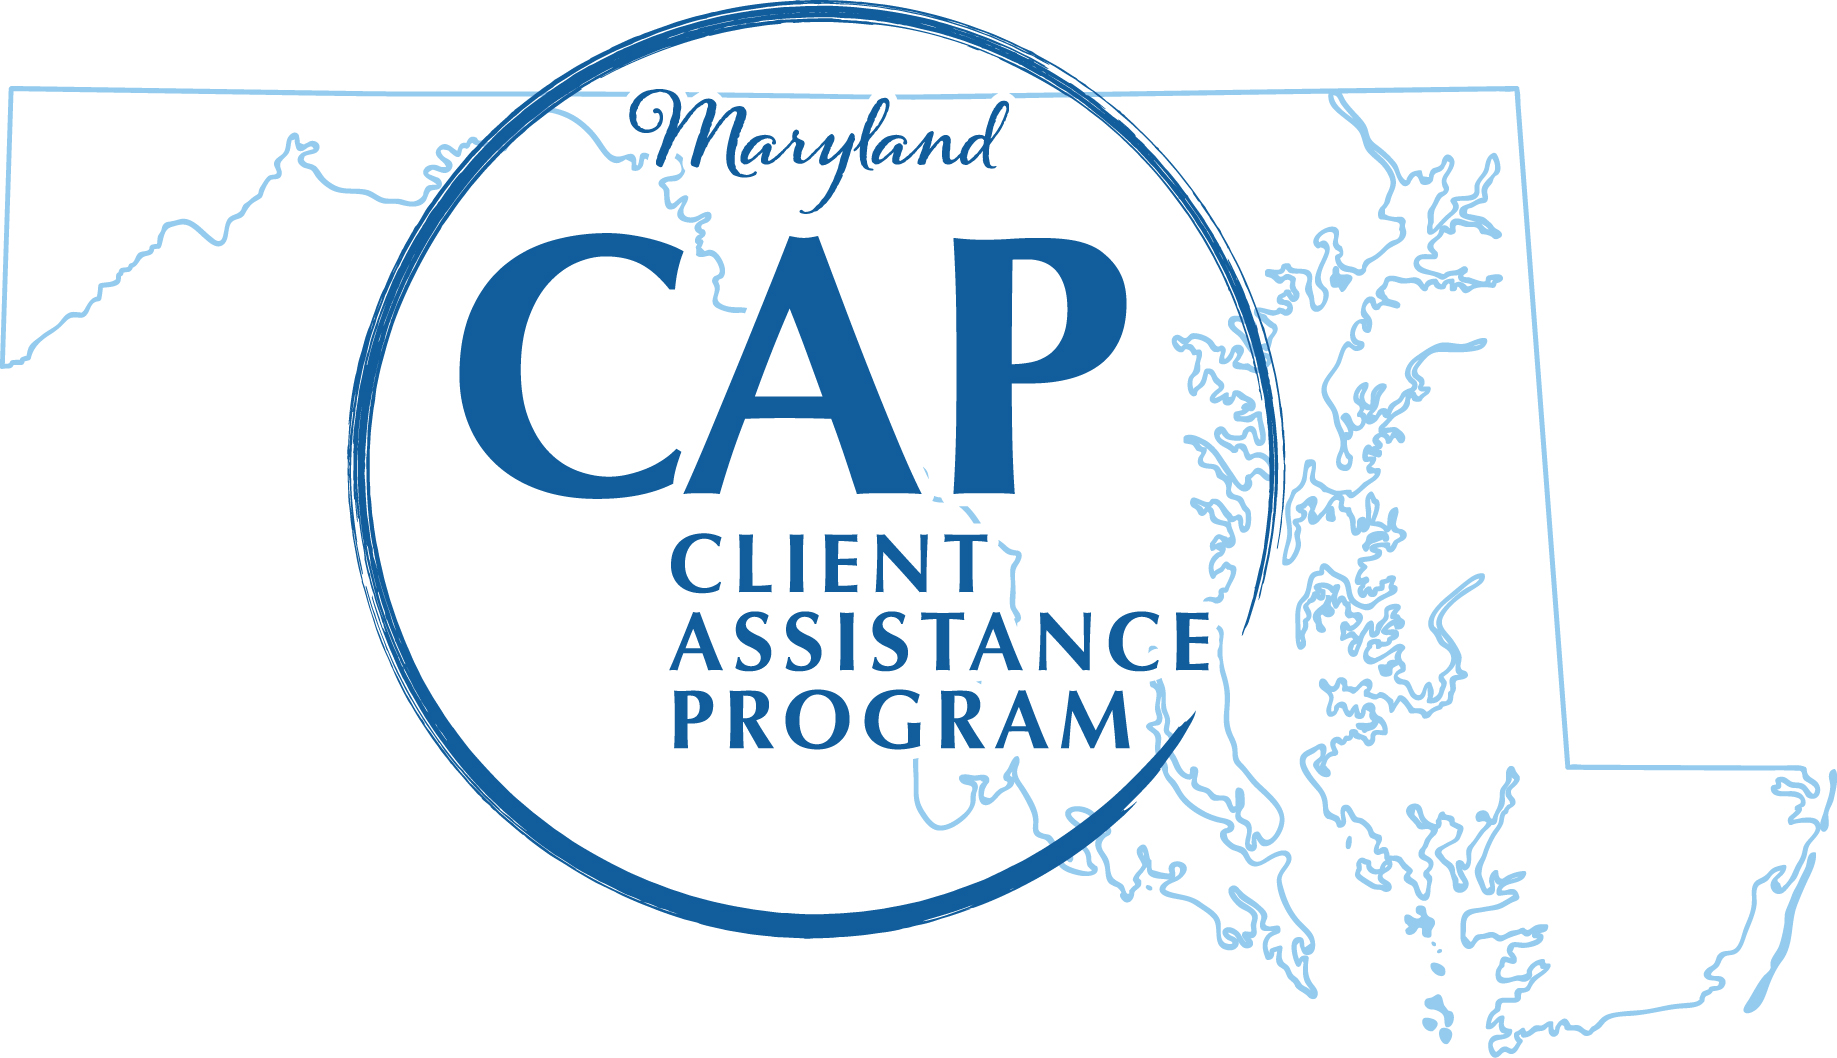 Client Assistance Program logo: A blue circle over a blue outine of the State of Maryland.